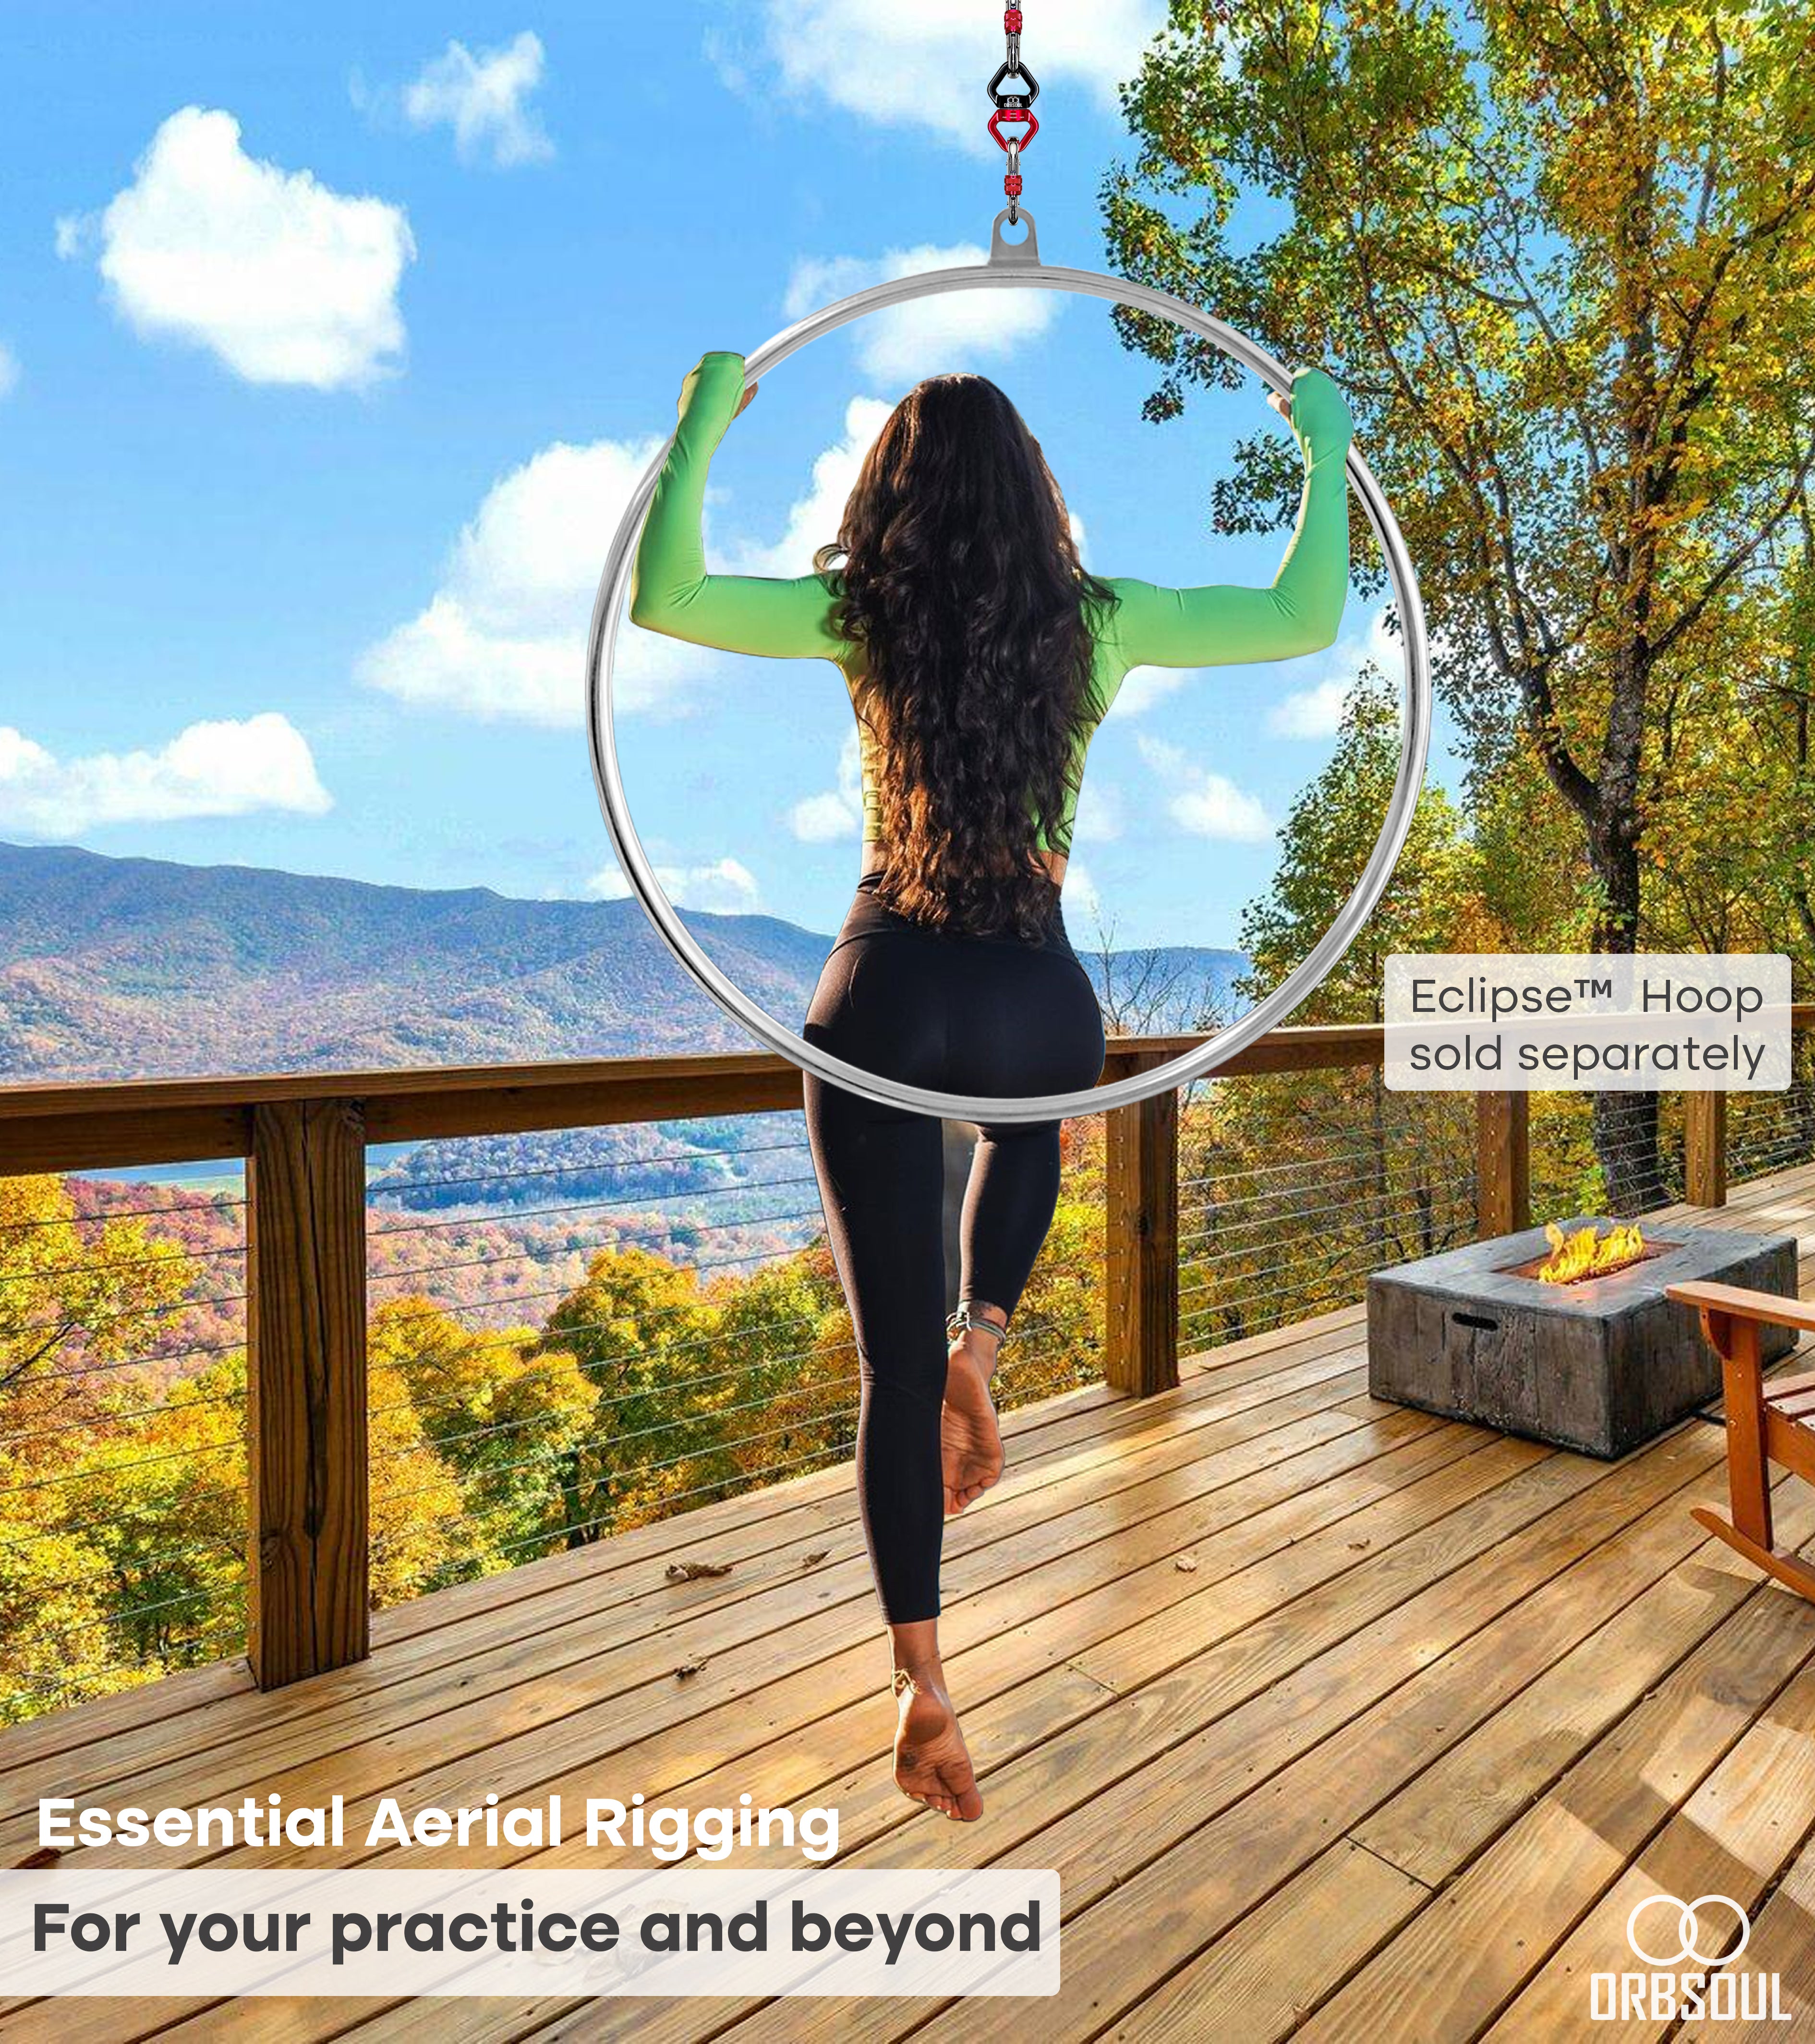 Orbsoul Essential aerial rigging set.  For you practice and beyond. Girl sitting on hoop rigged using essential rigging hardware.